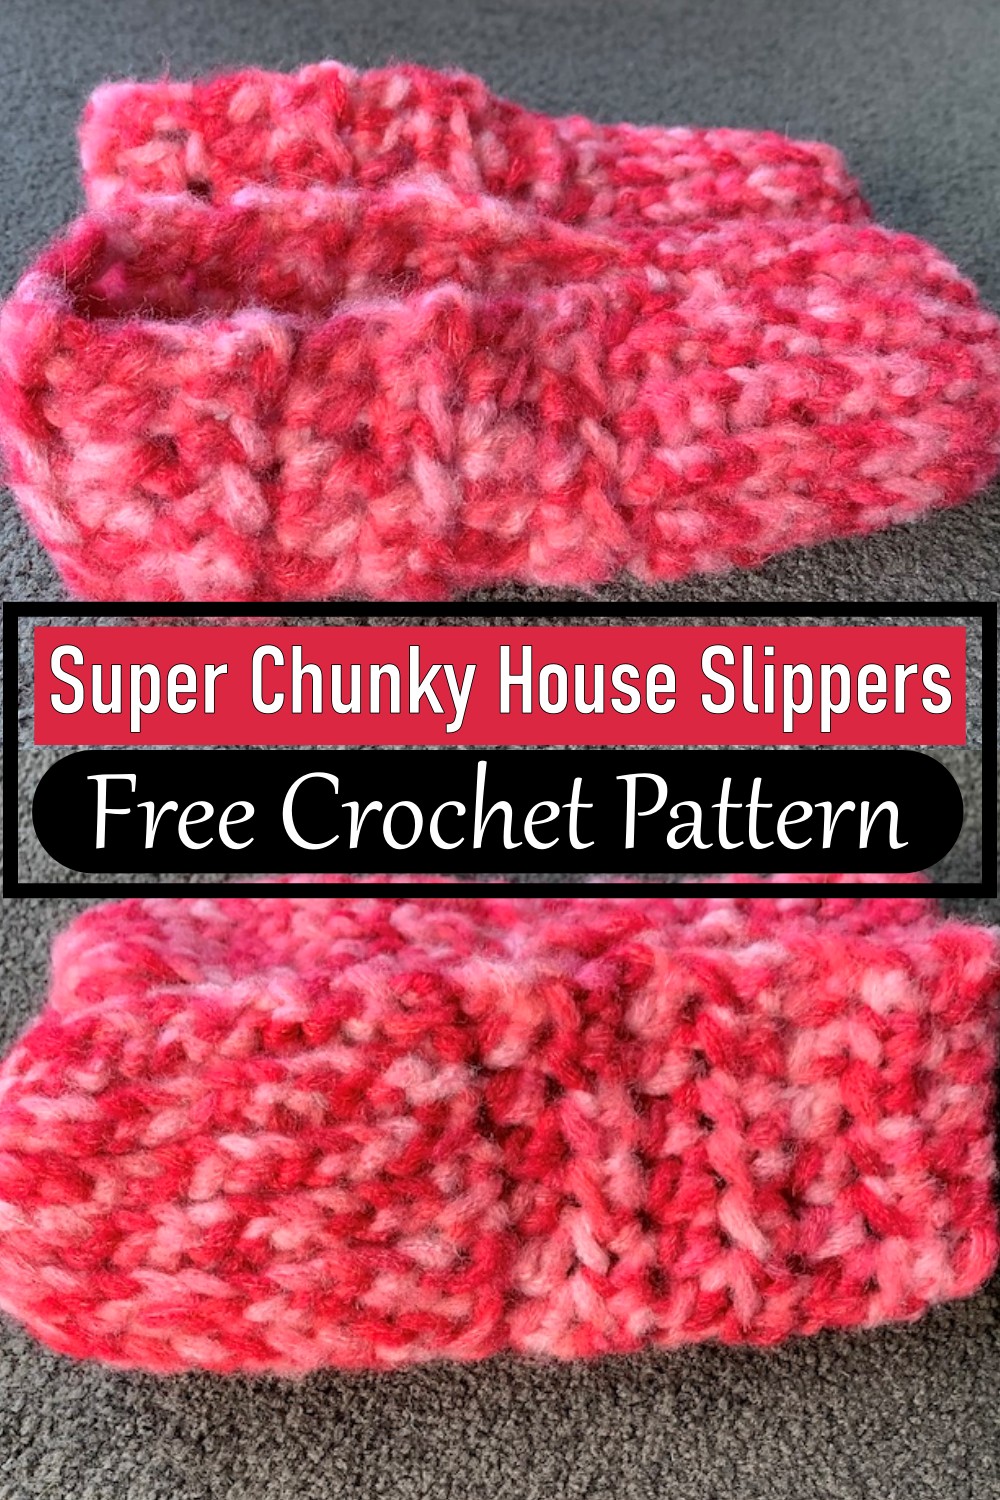 Super Chunky House Slippers